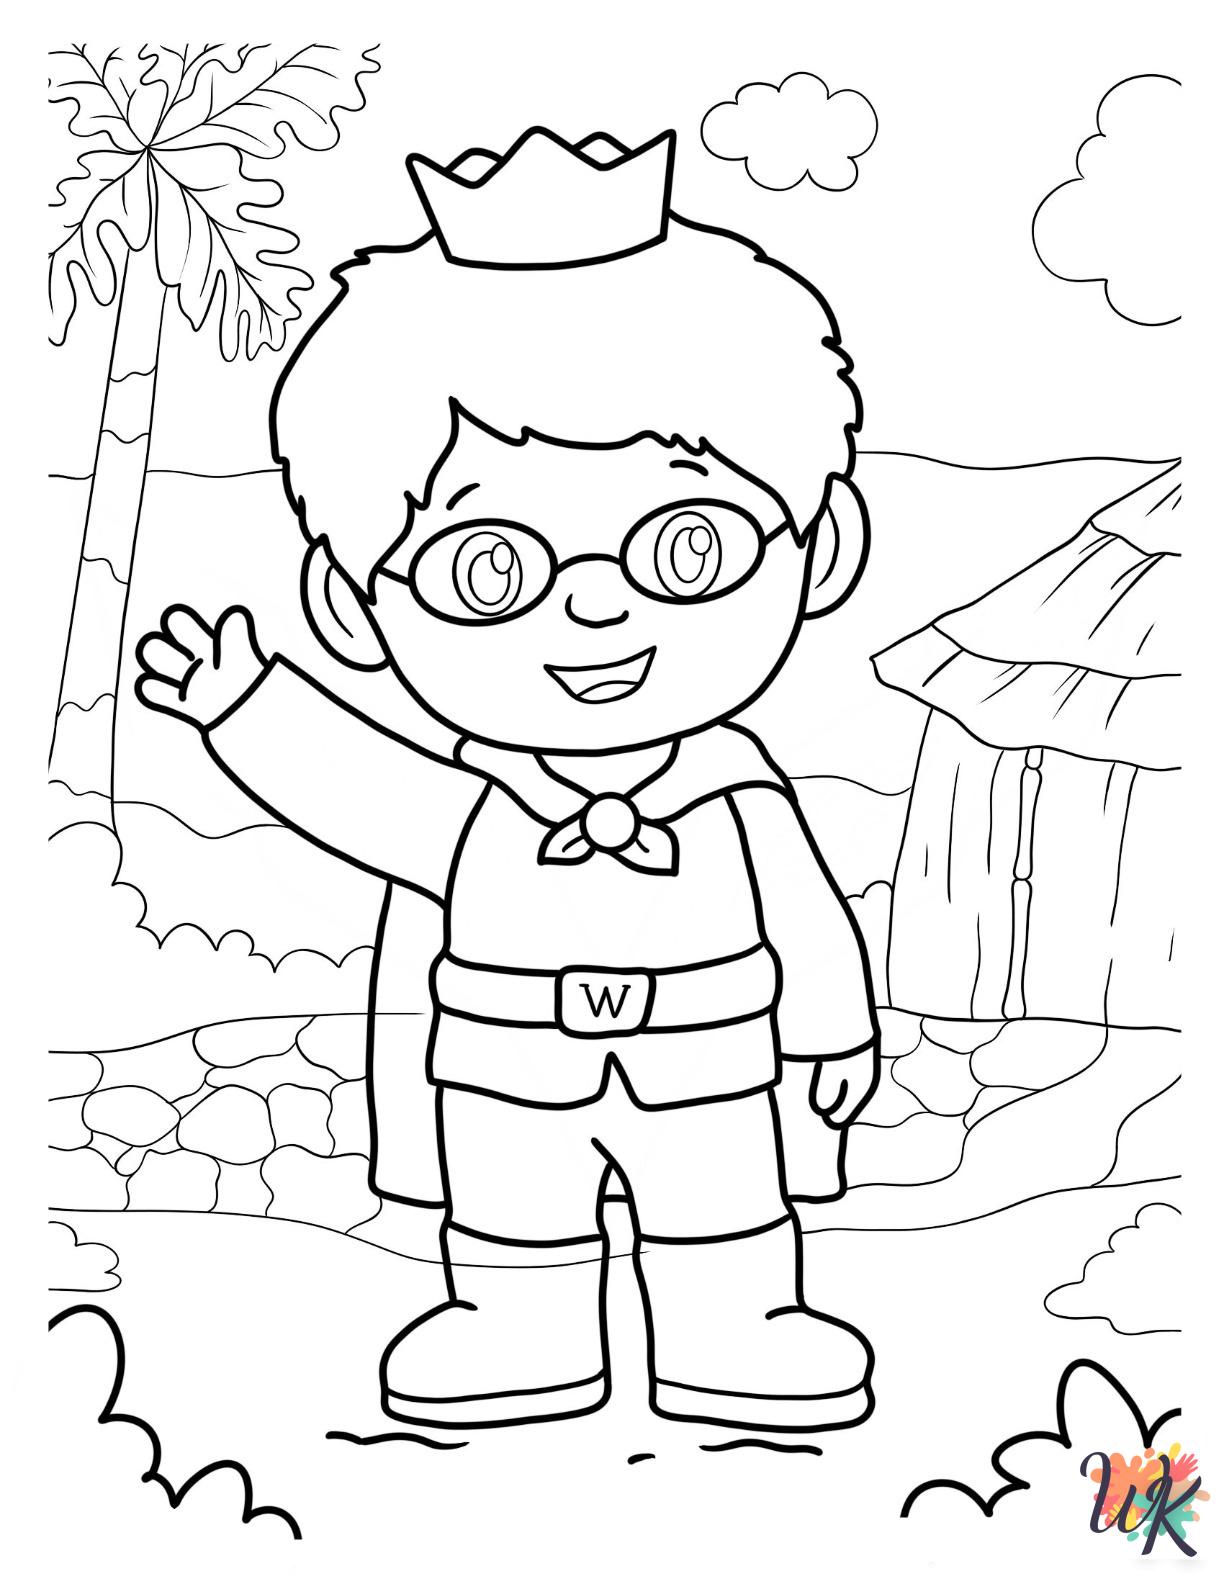 Daniel Tiger free coloring pages